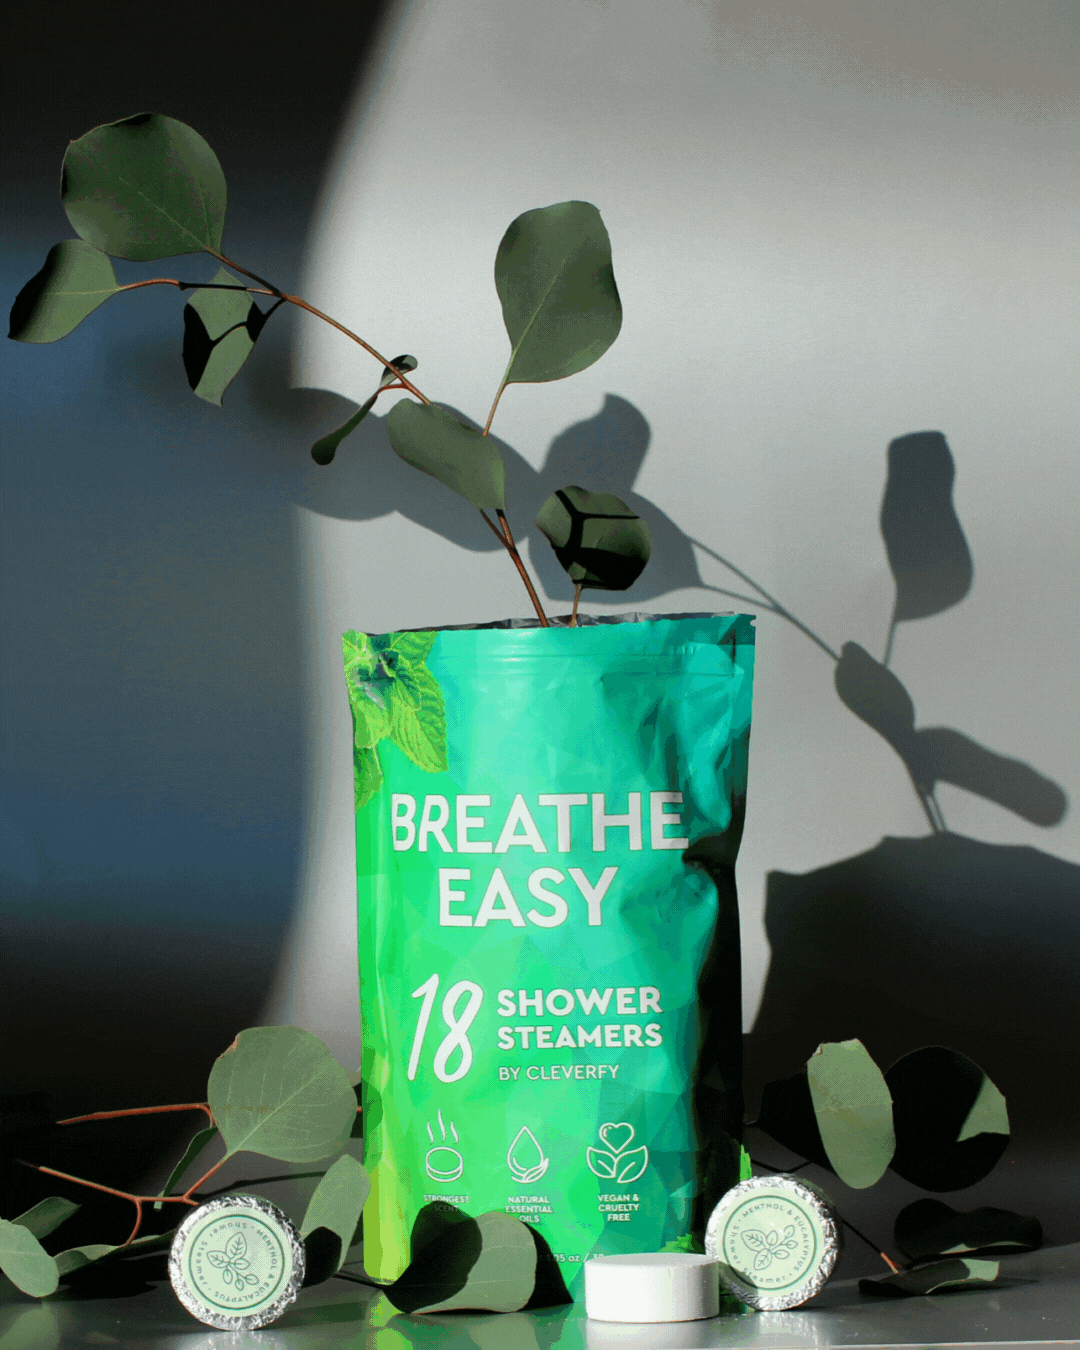 Cleverfy Breathe Easy Megapack of 18 Shower Steamers